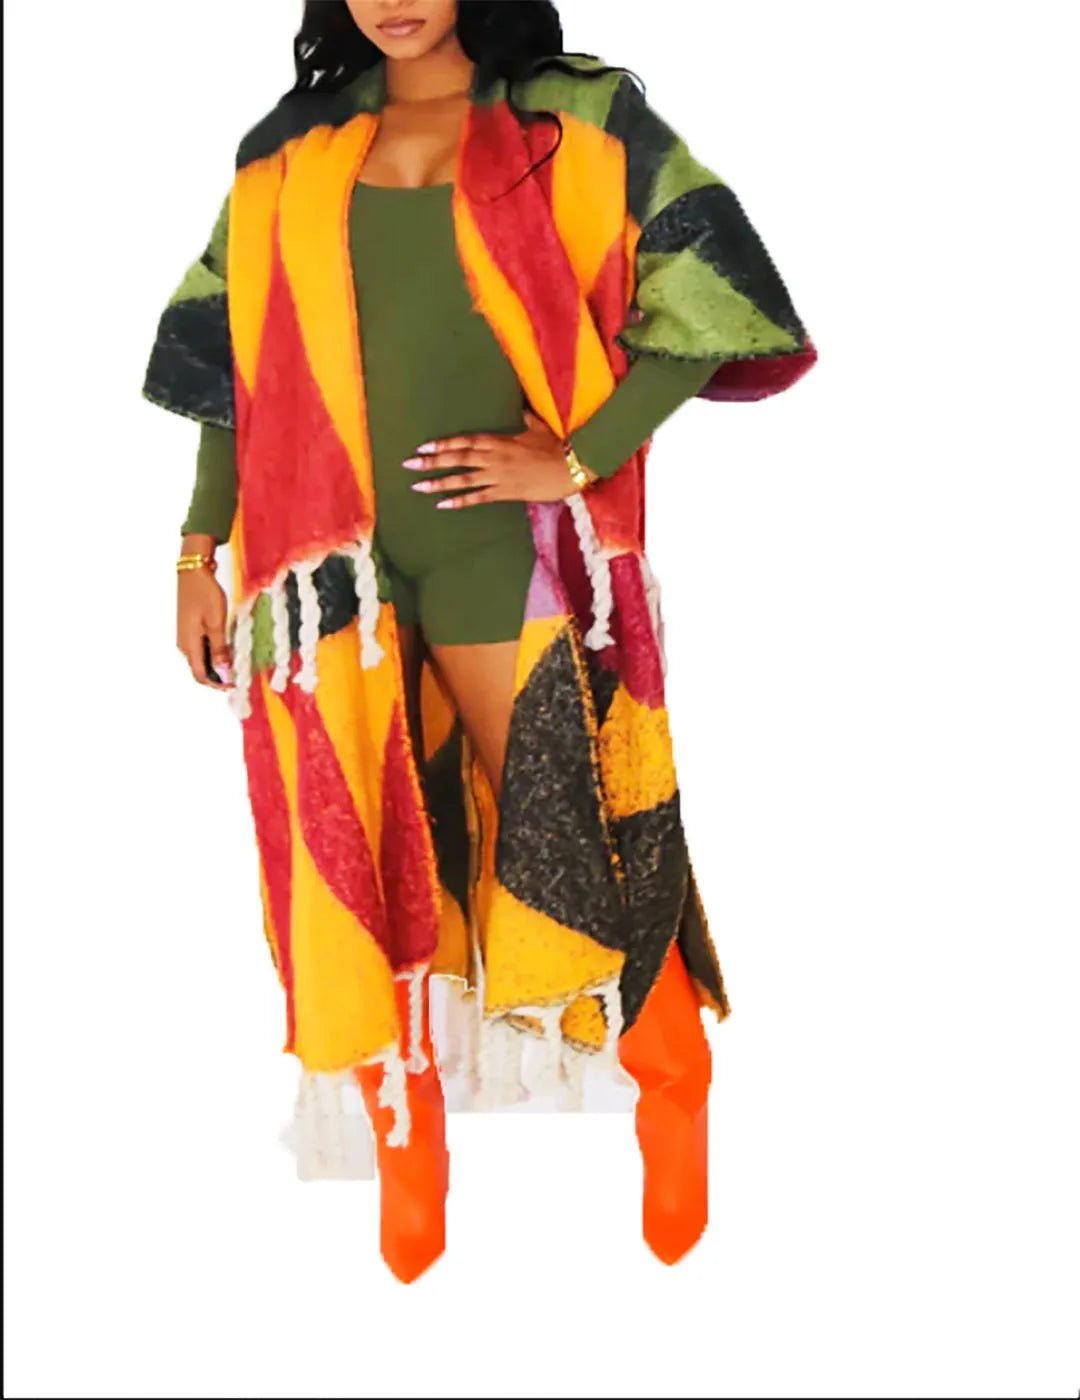 African-inspired Plus Size Casual Print Fringe Cardigans: Stylish Ankle Length Outwear for Winter - Flexi Africa - Flexi Africa offers Free Delivery Worldwide - Vibrant African traditional clothing showcasing bold prints and intricate designs